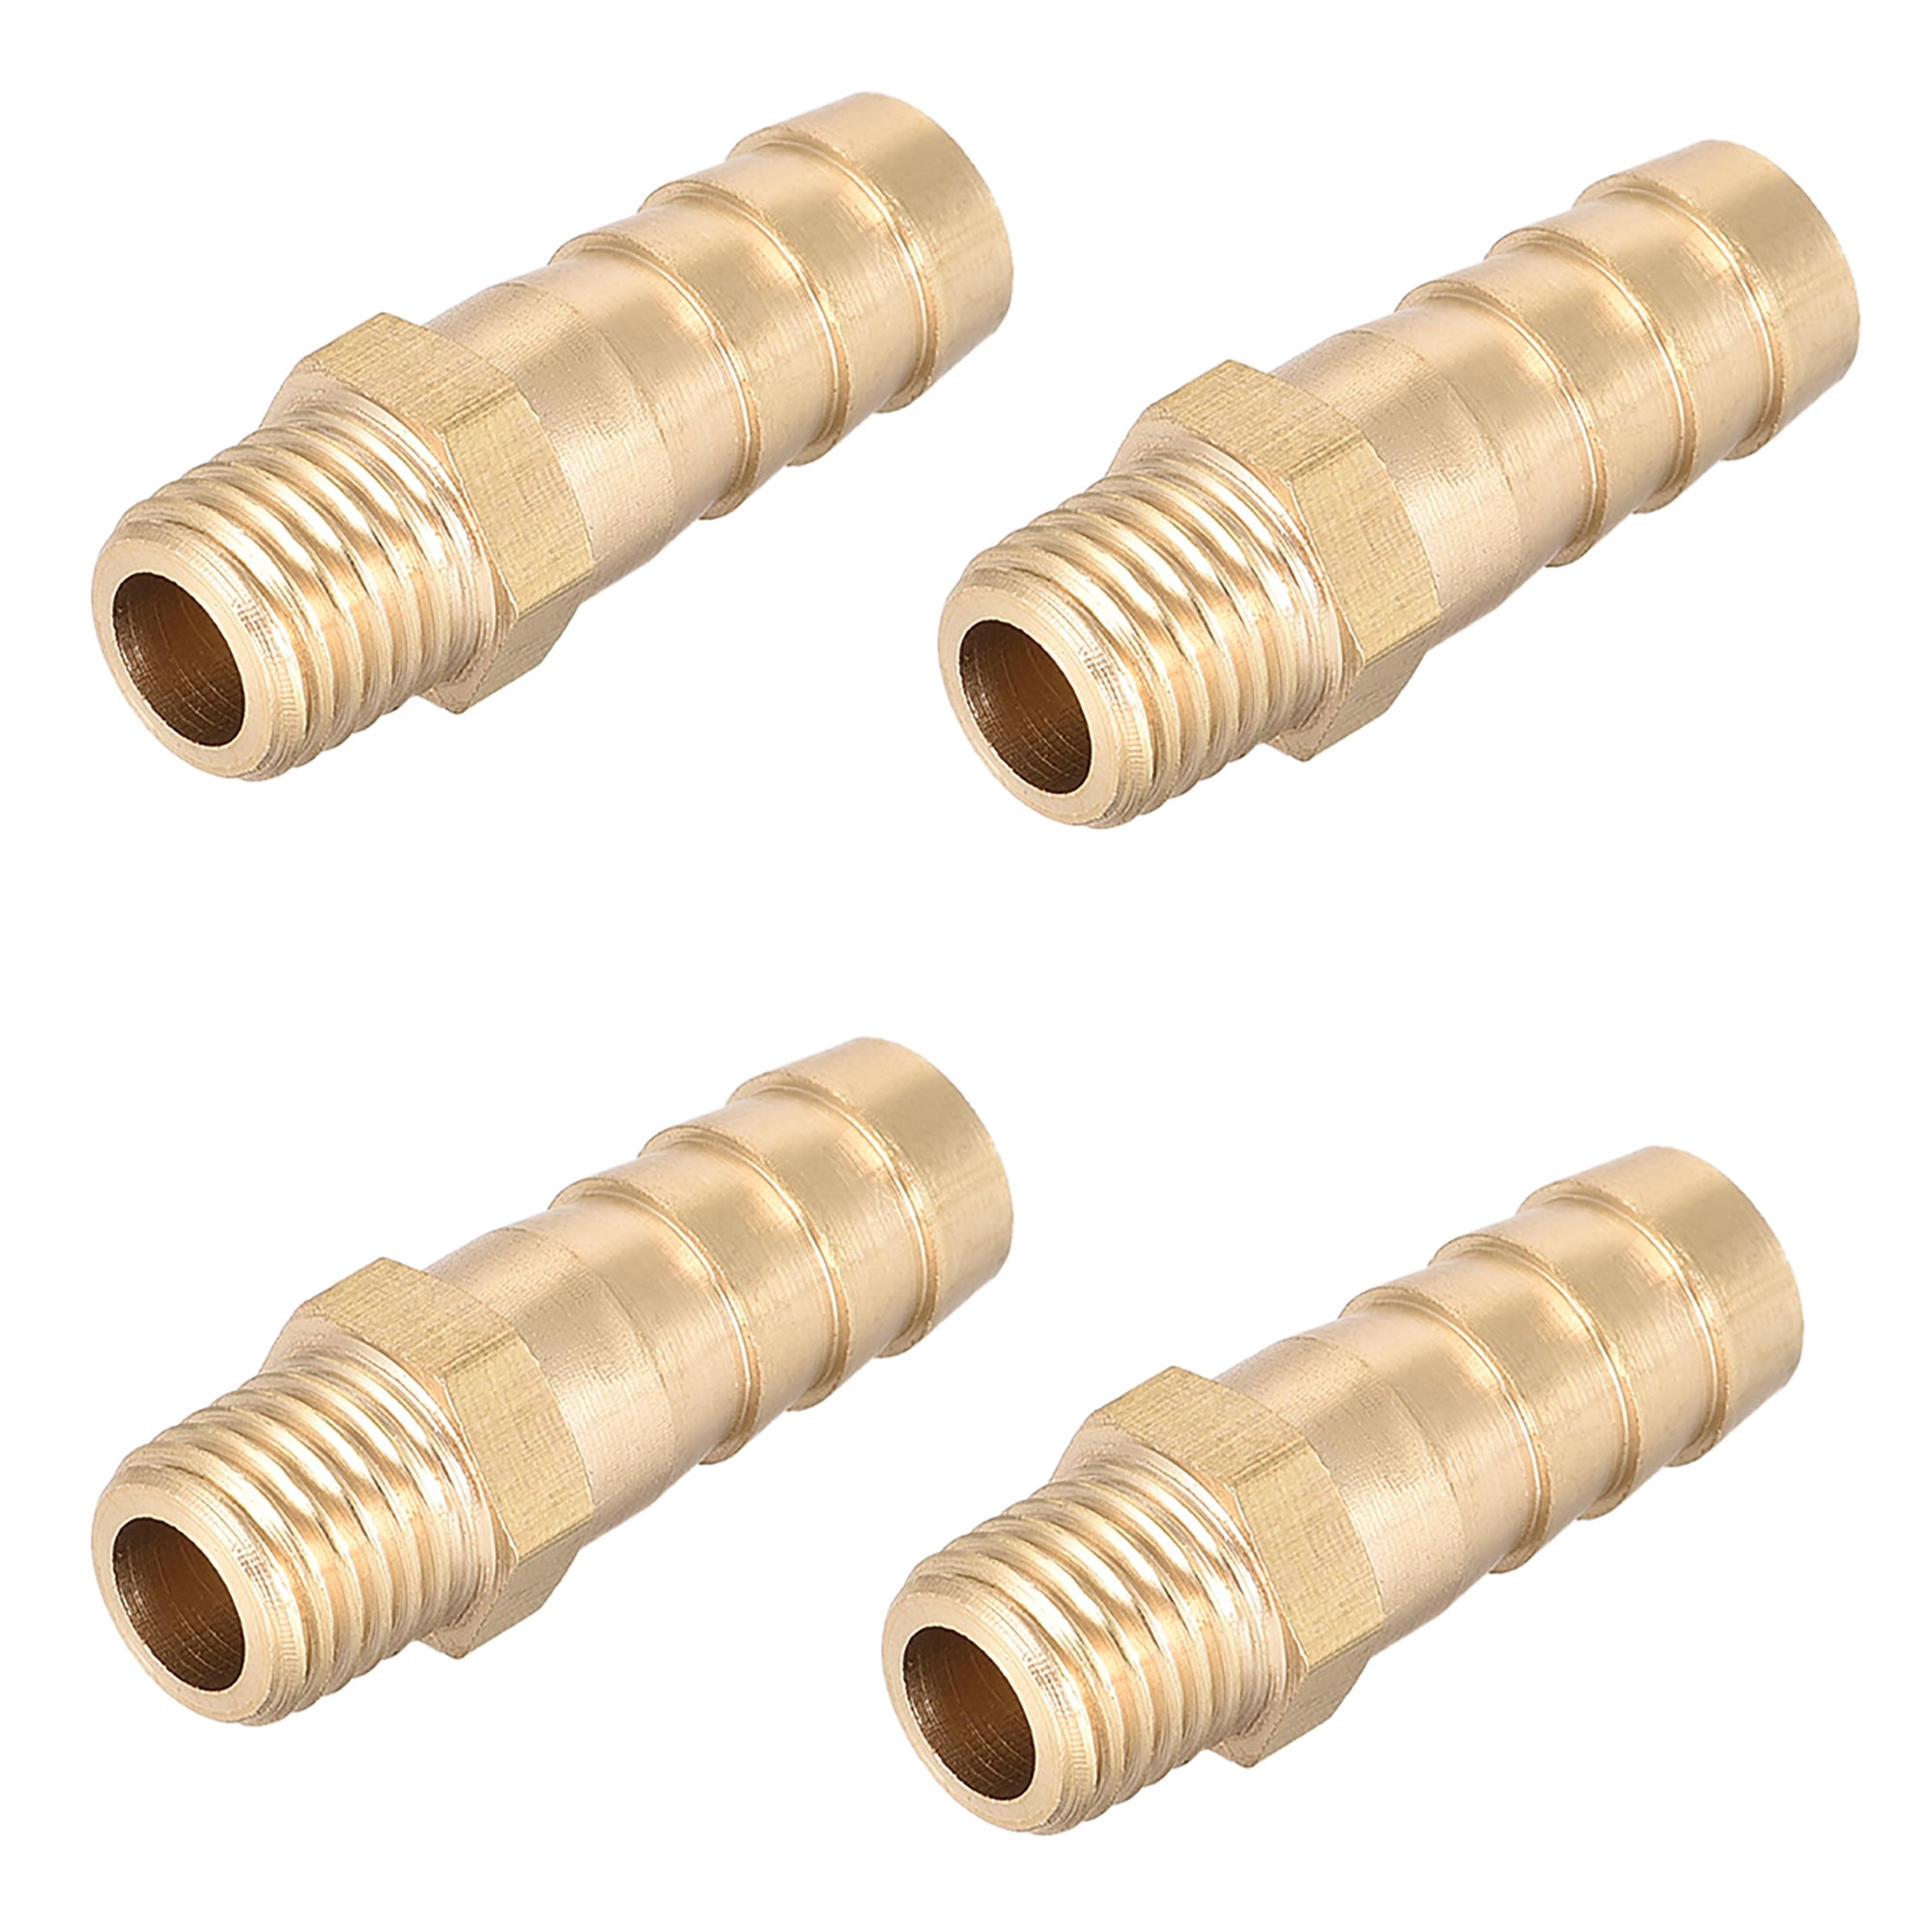 1pcs 6mm-12mm1/4 To 1/2 Brass Union Hose Barb Fitting Fuel Reducer Joiner 